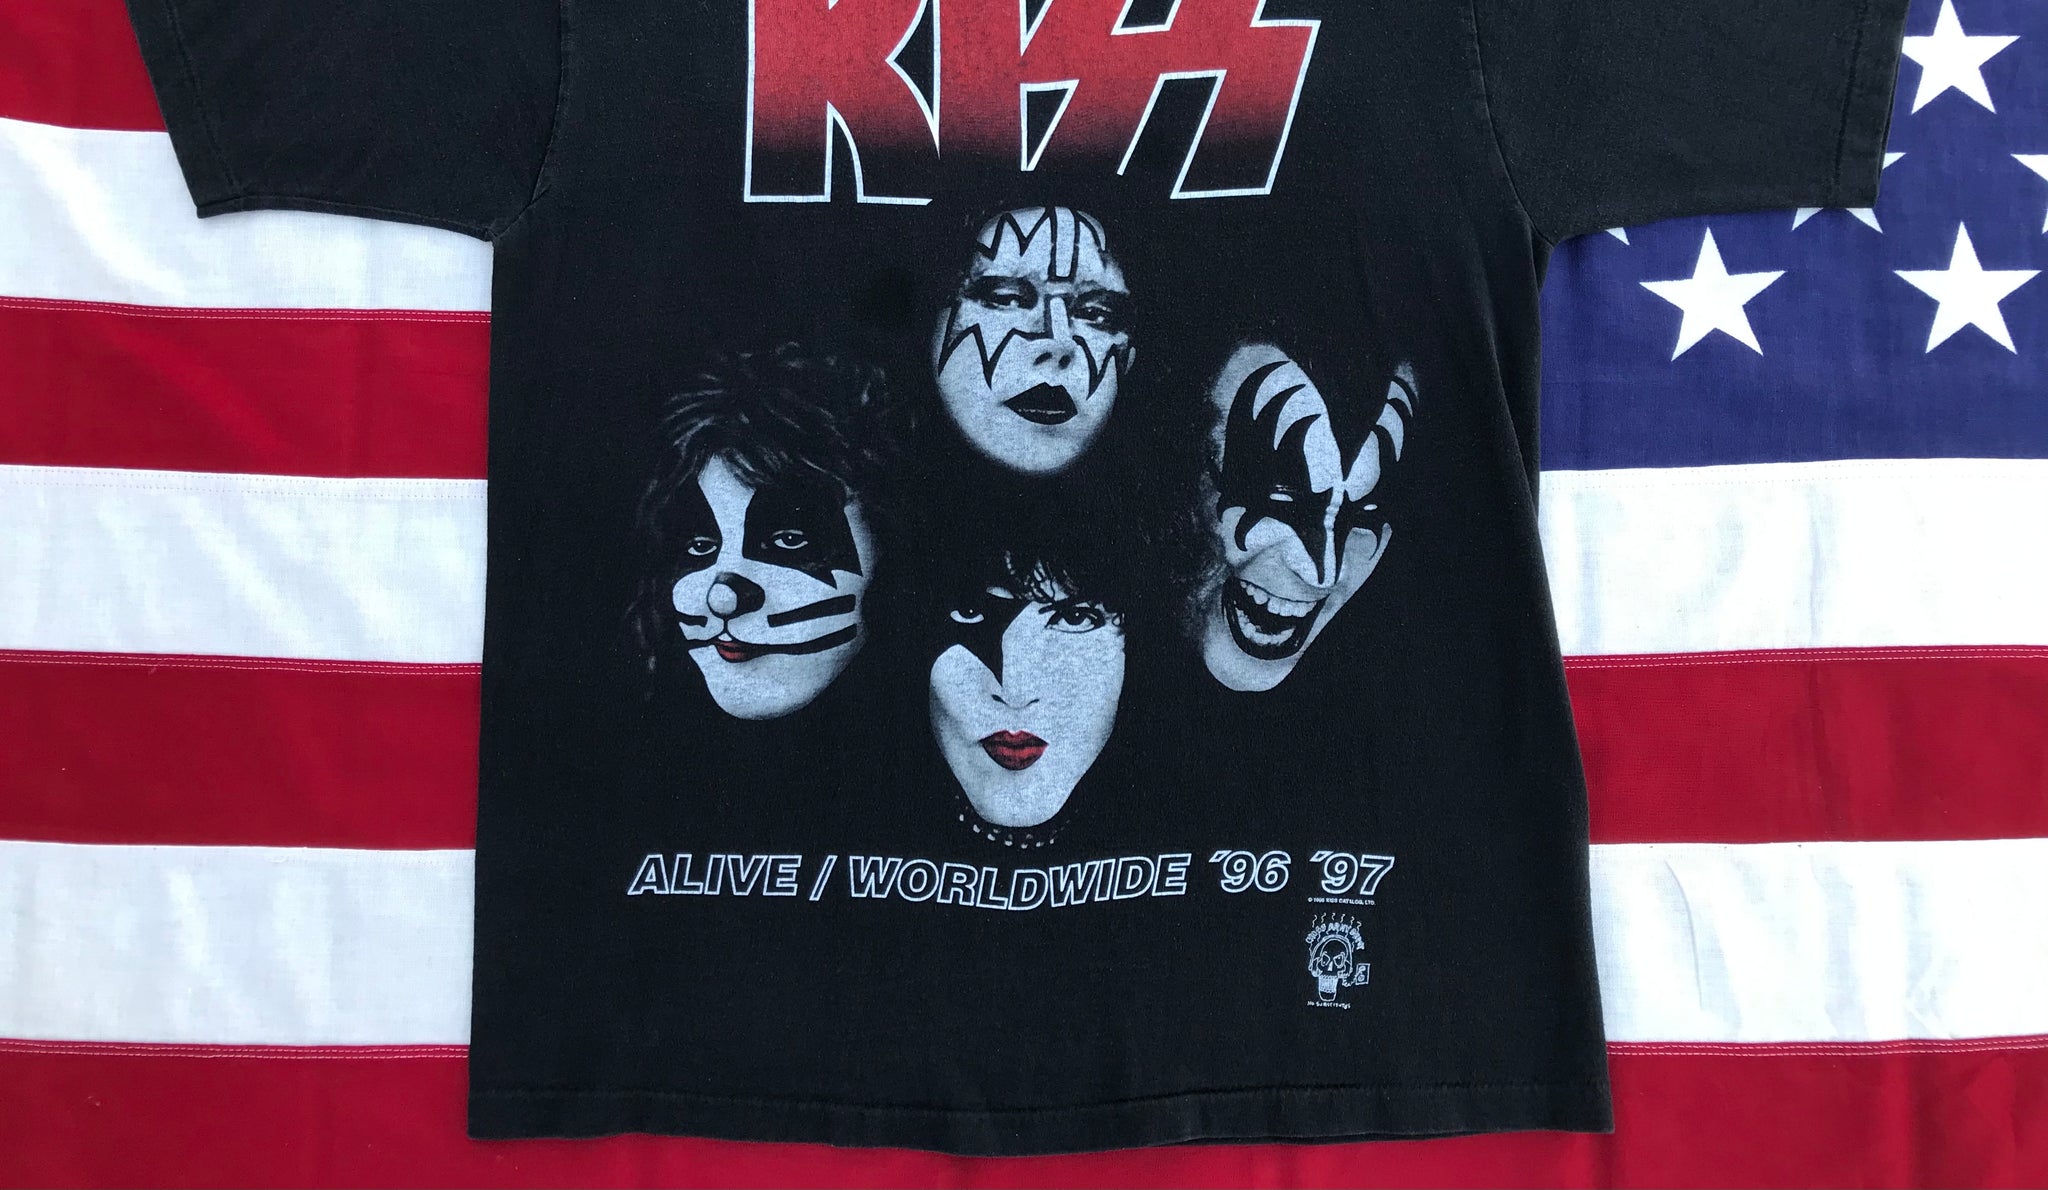 Kiss Alive / Worldwide Tour ‘96 ‘97  Vintage Rock T-Shirt Kiss Army Depot No Substitutes by Allsport Made in USA